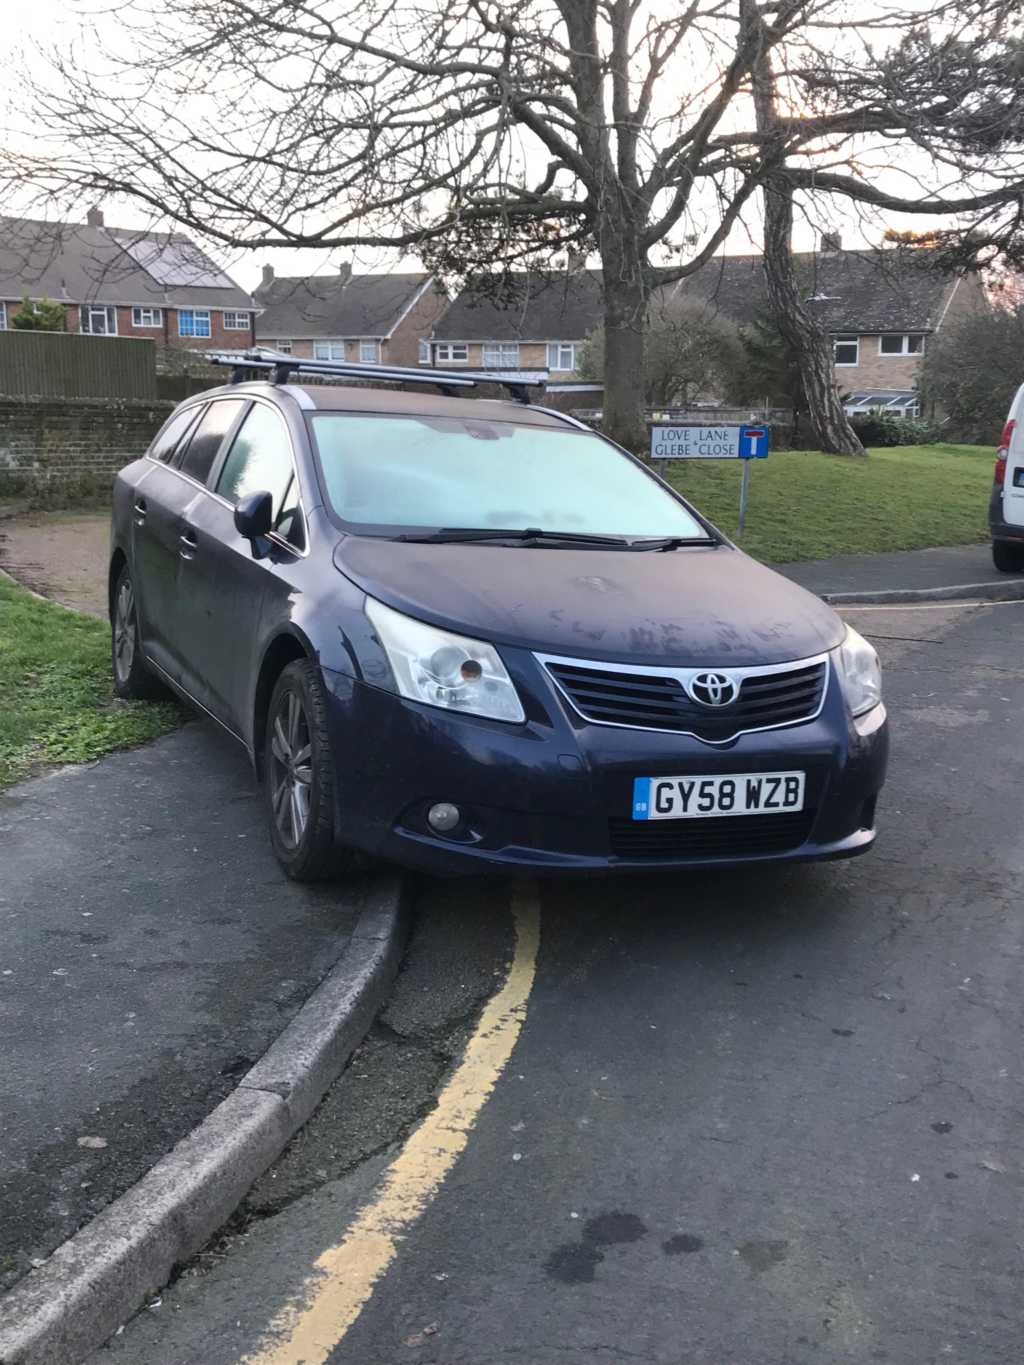 GY58 WZB displaying Inconsiderate Parking